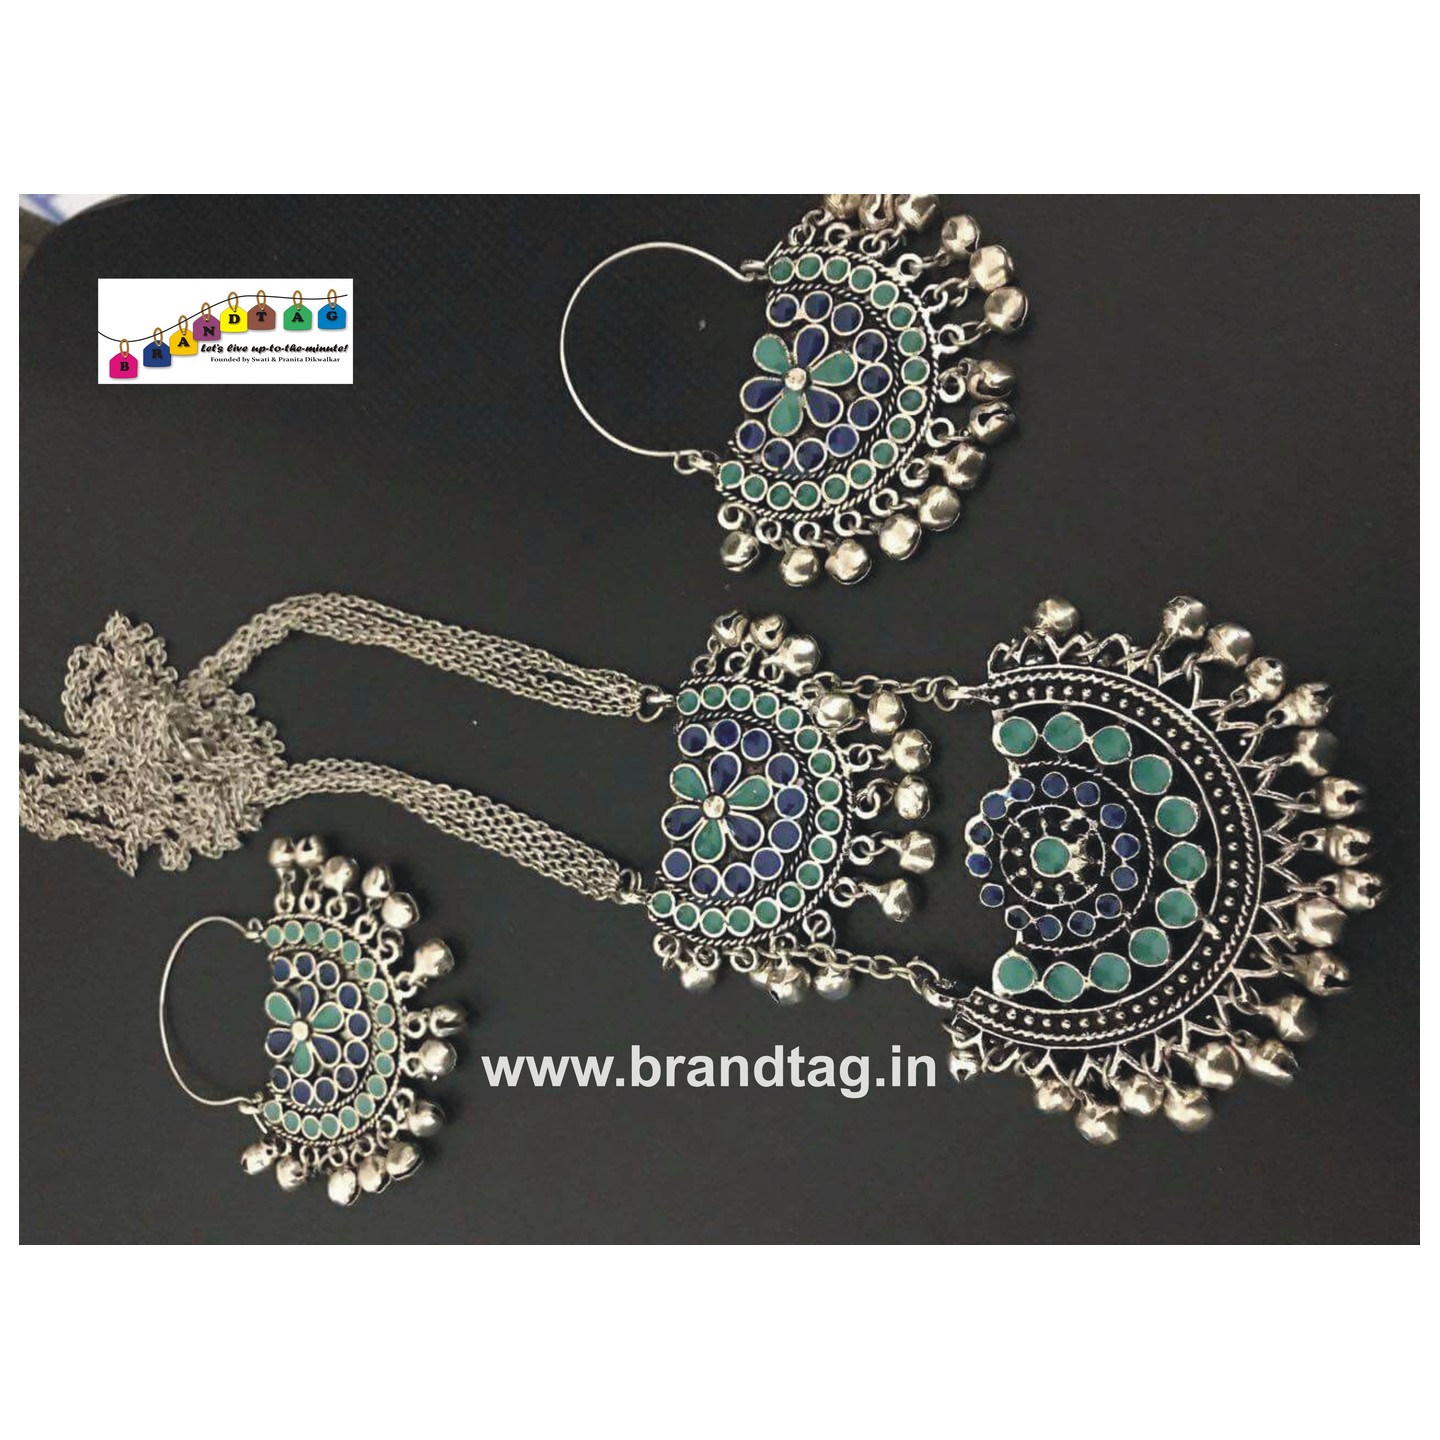 Special Navratri Collection...Silver Oxidized Afgaani Necklace Set!! 